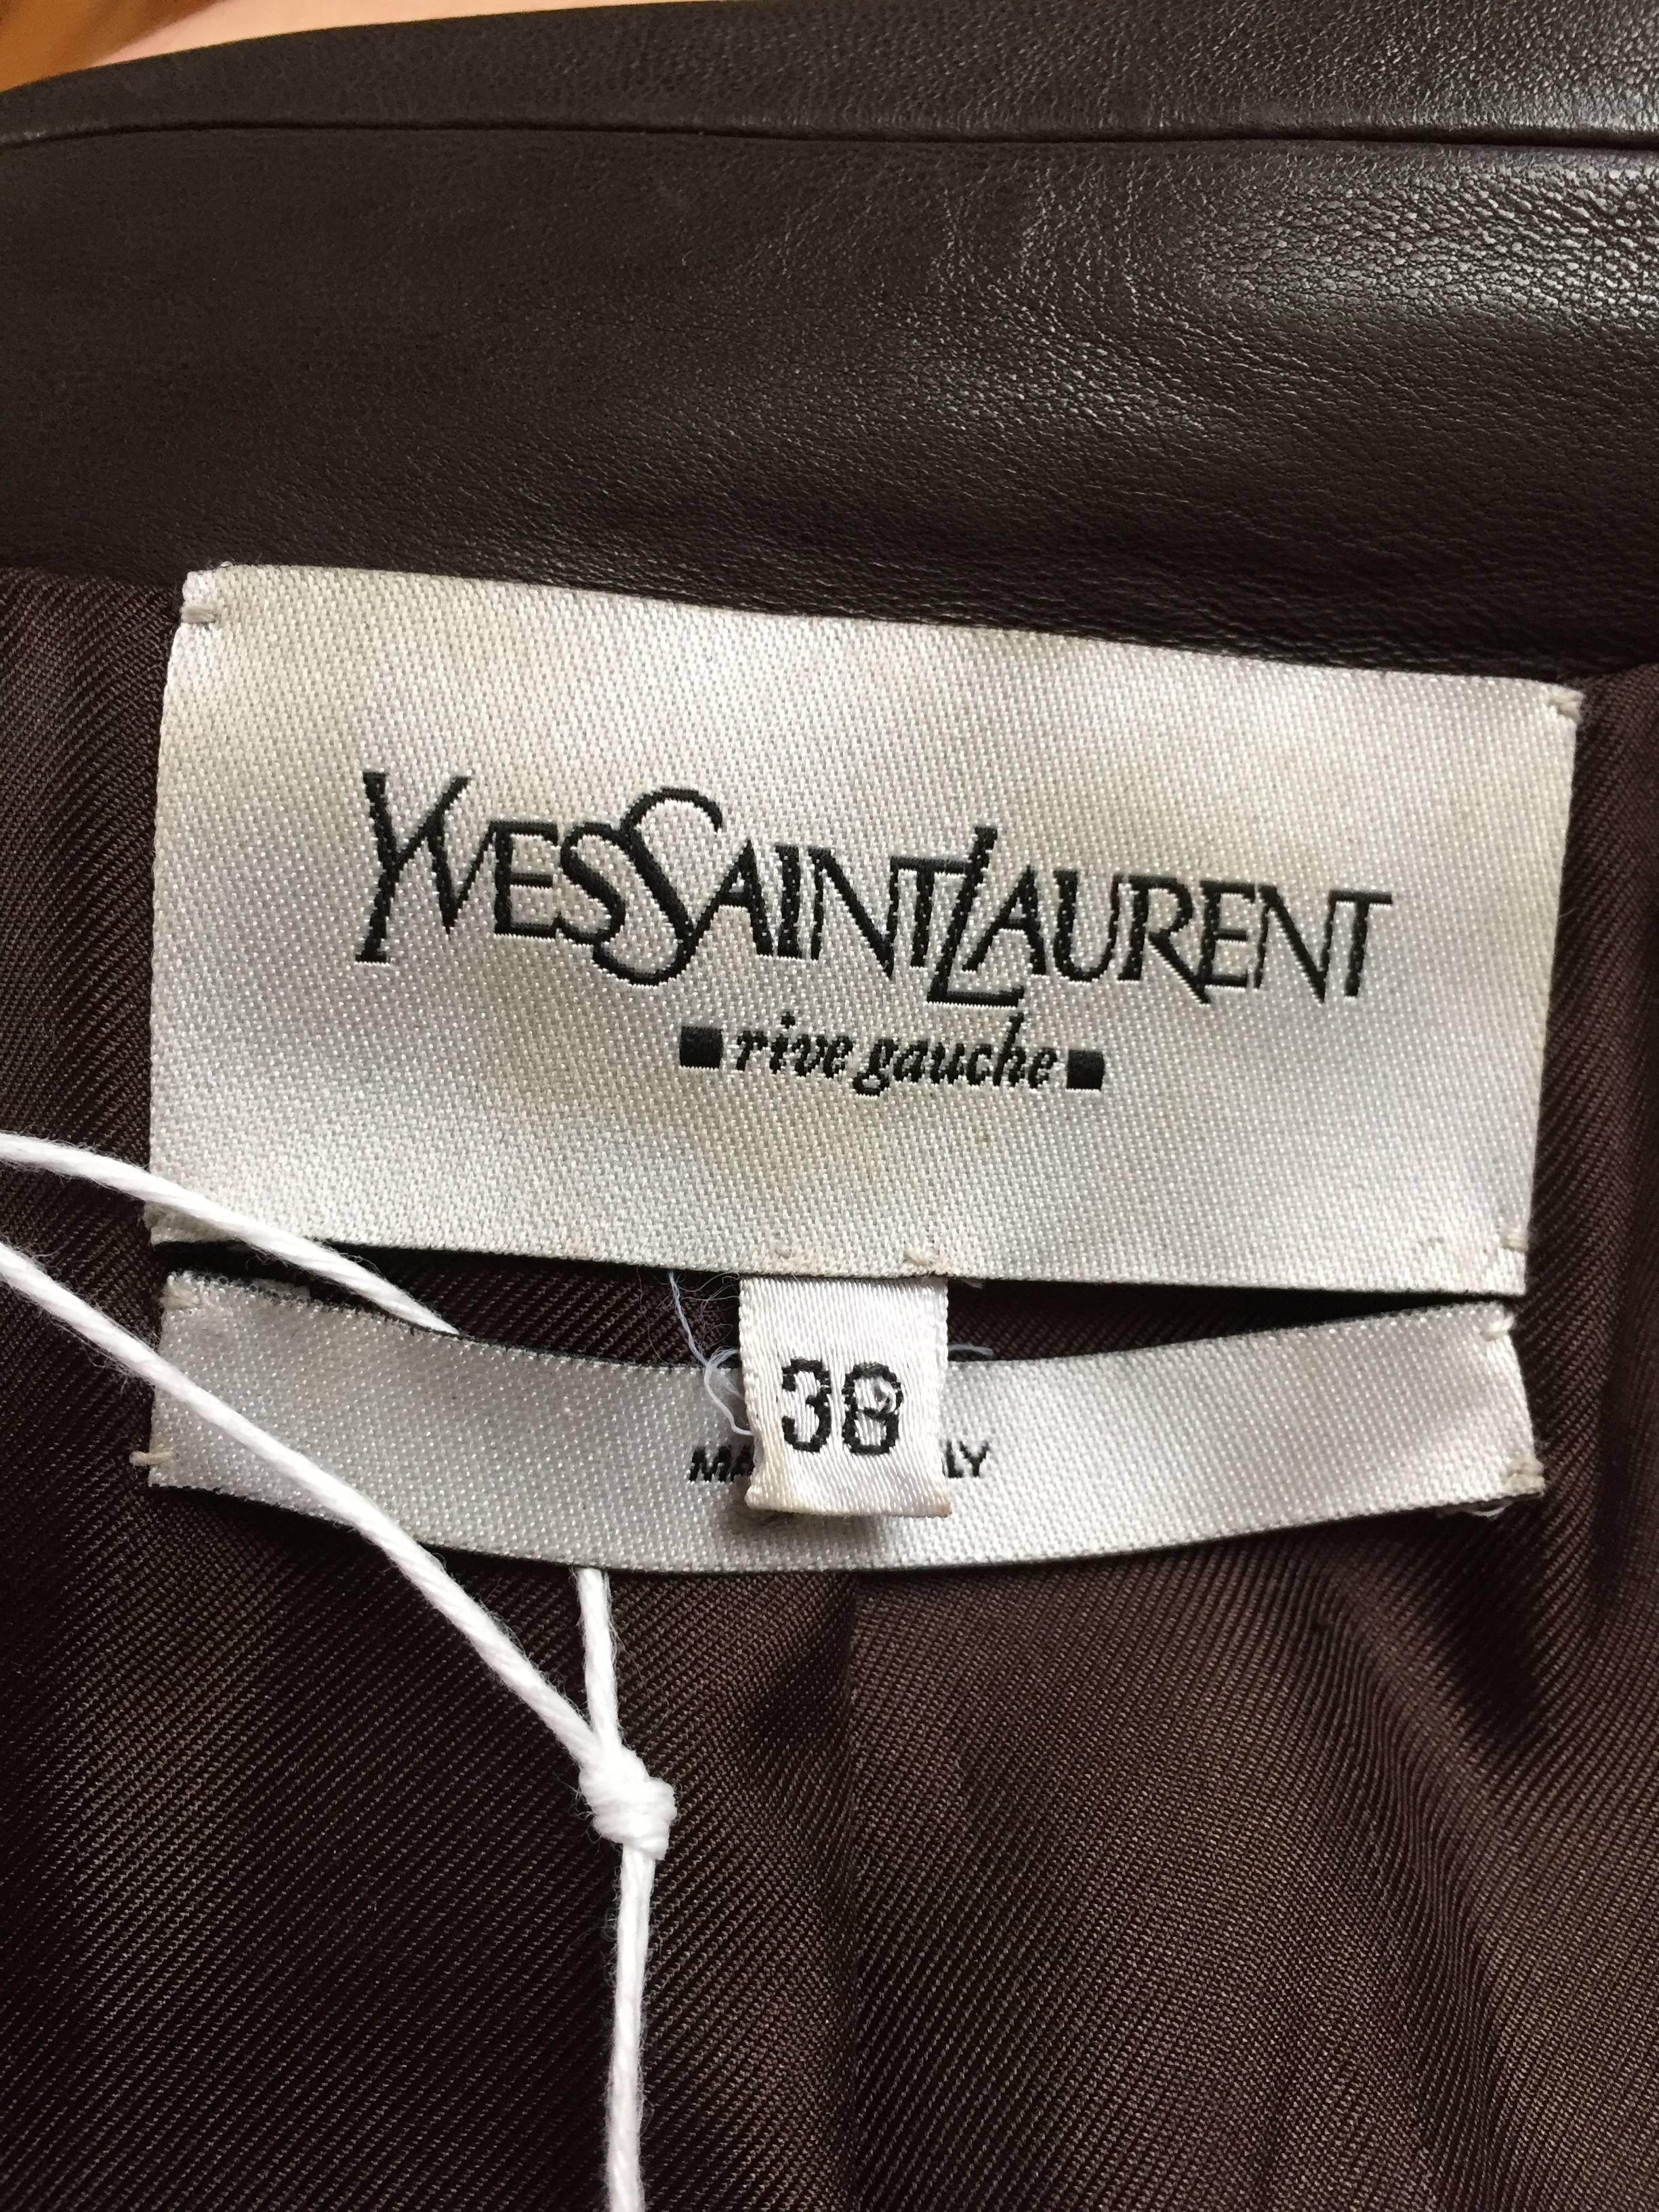 YSL by Tom Ford 2002 brown leather runway jacket size 4.  For Sale 6